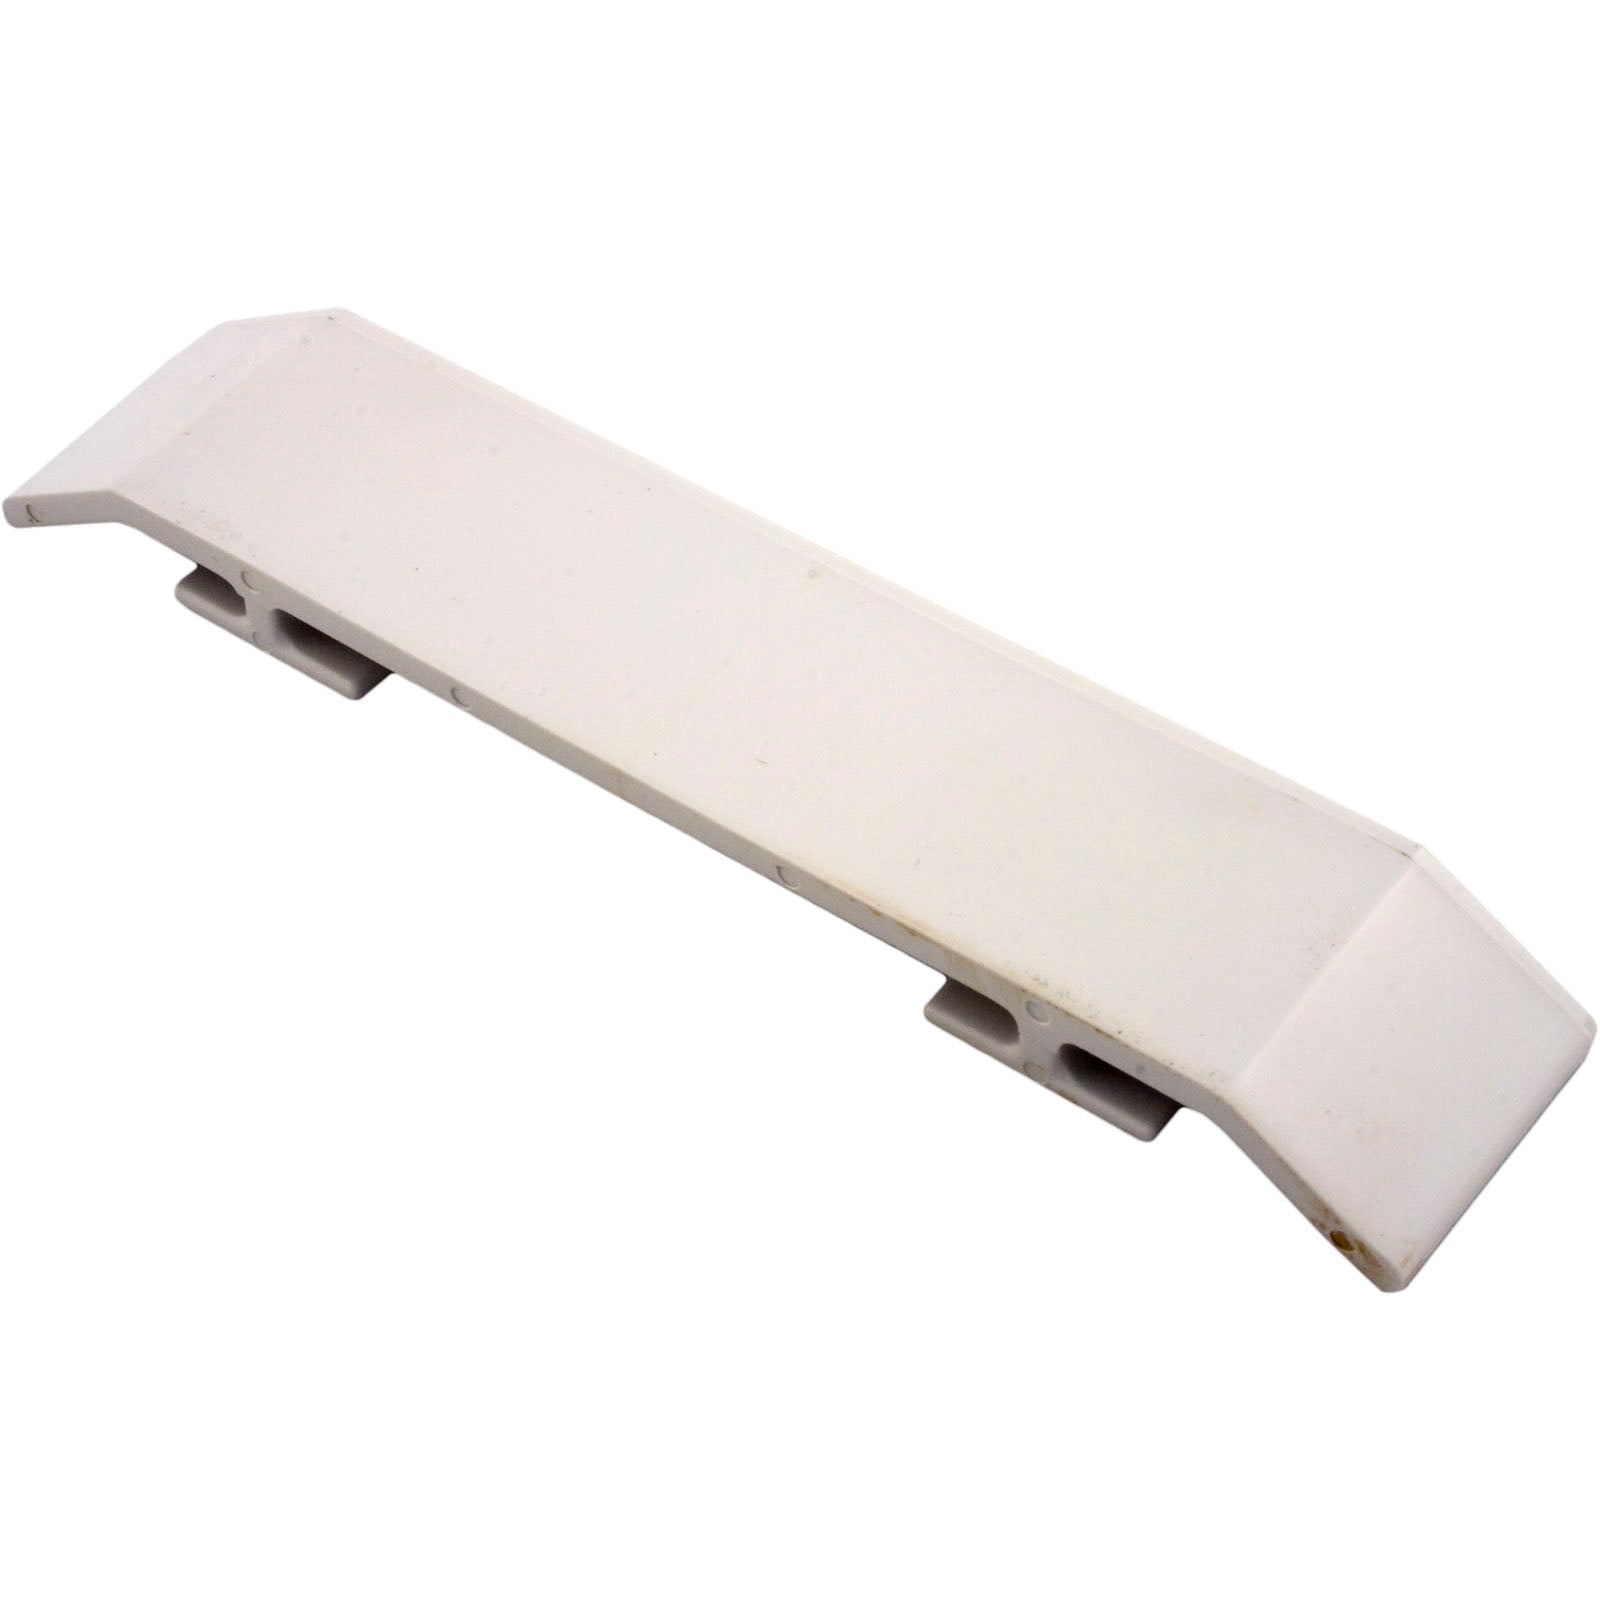 Front Bumper, Pentair Letro LL105PM Cleaner, White- LLU81PM